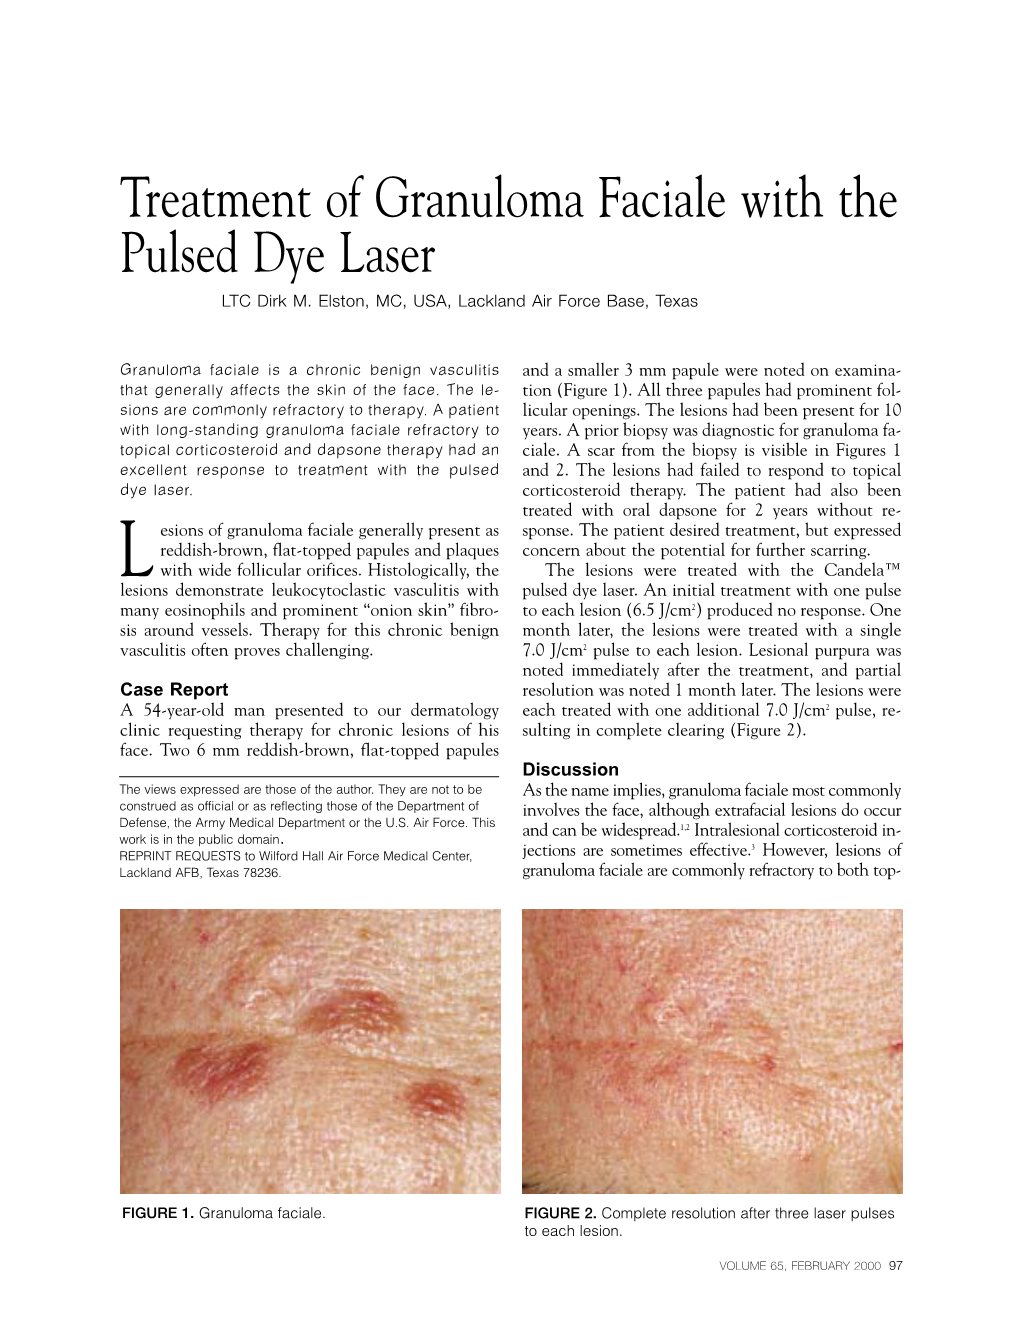 Treatment of Granuloma Faciale with the Pulsed Dye Laser LTC Dirk M